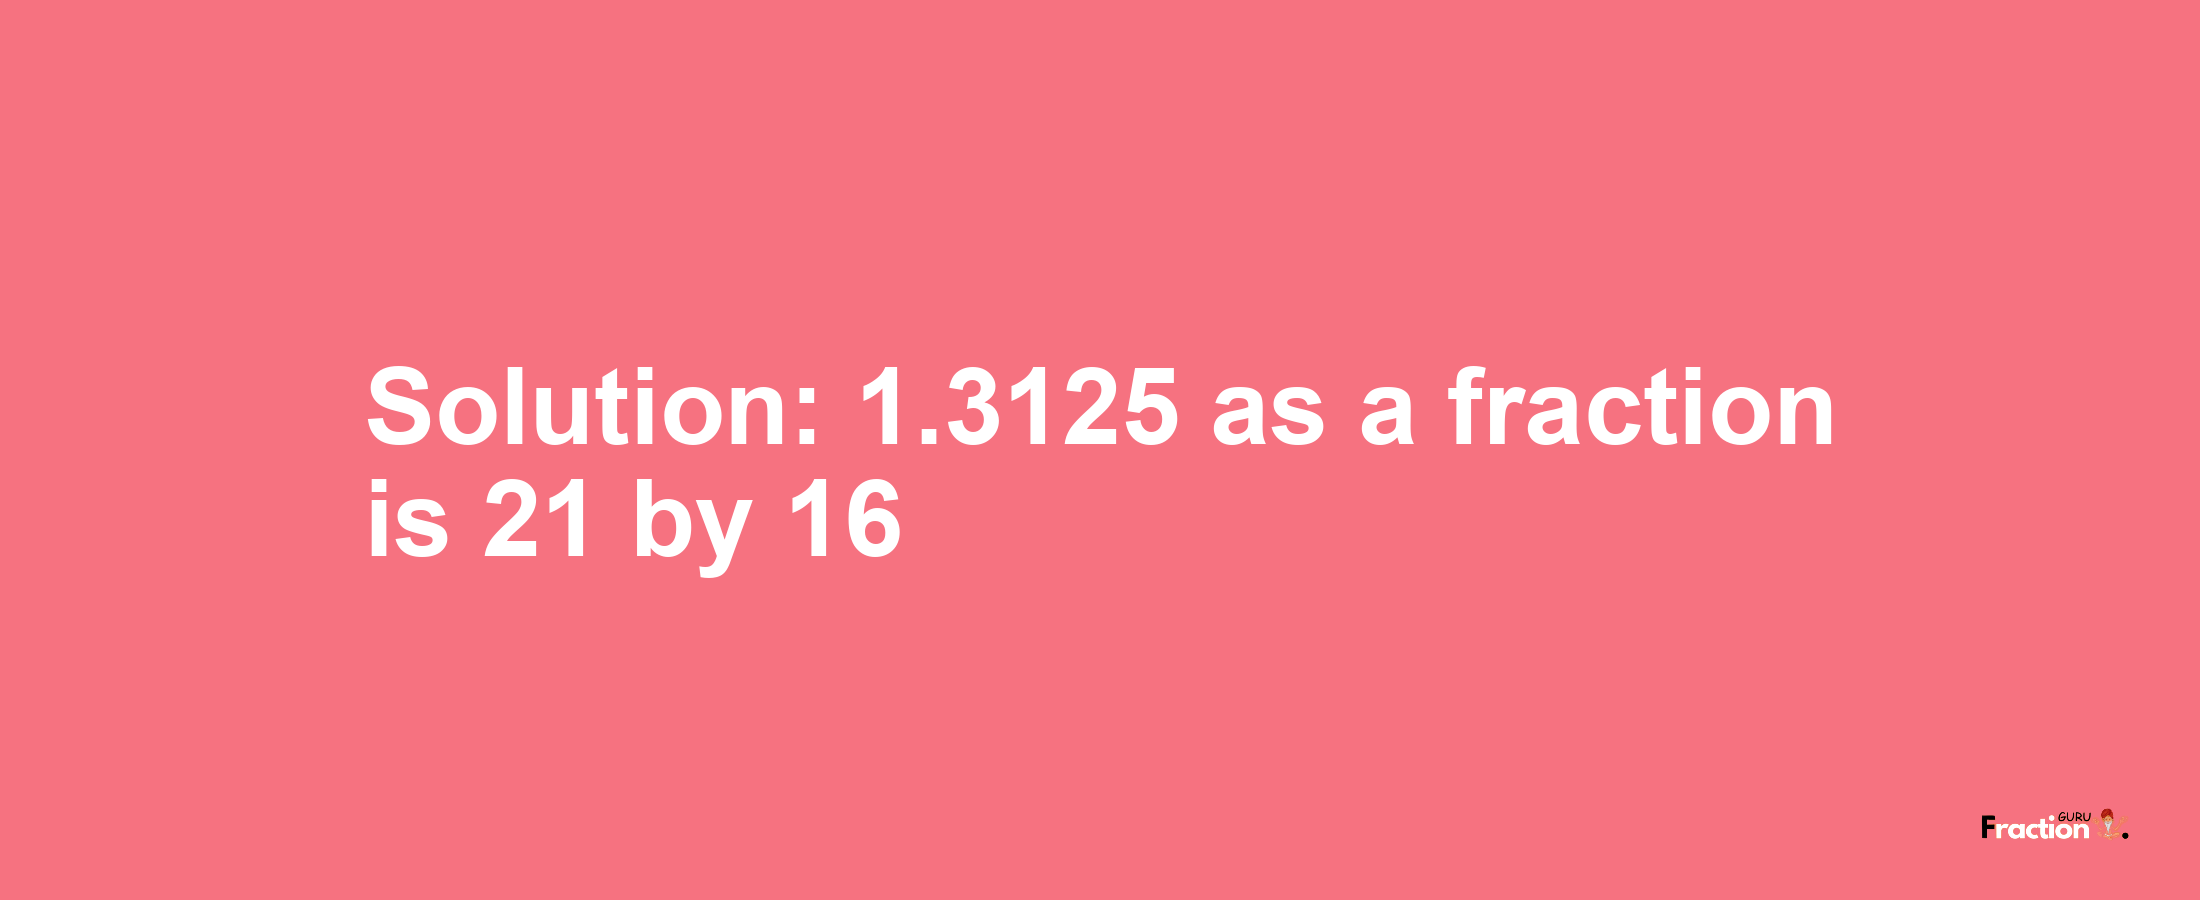 Solution:1.3125 as a fraction is 21/16